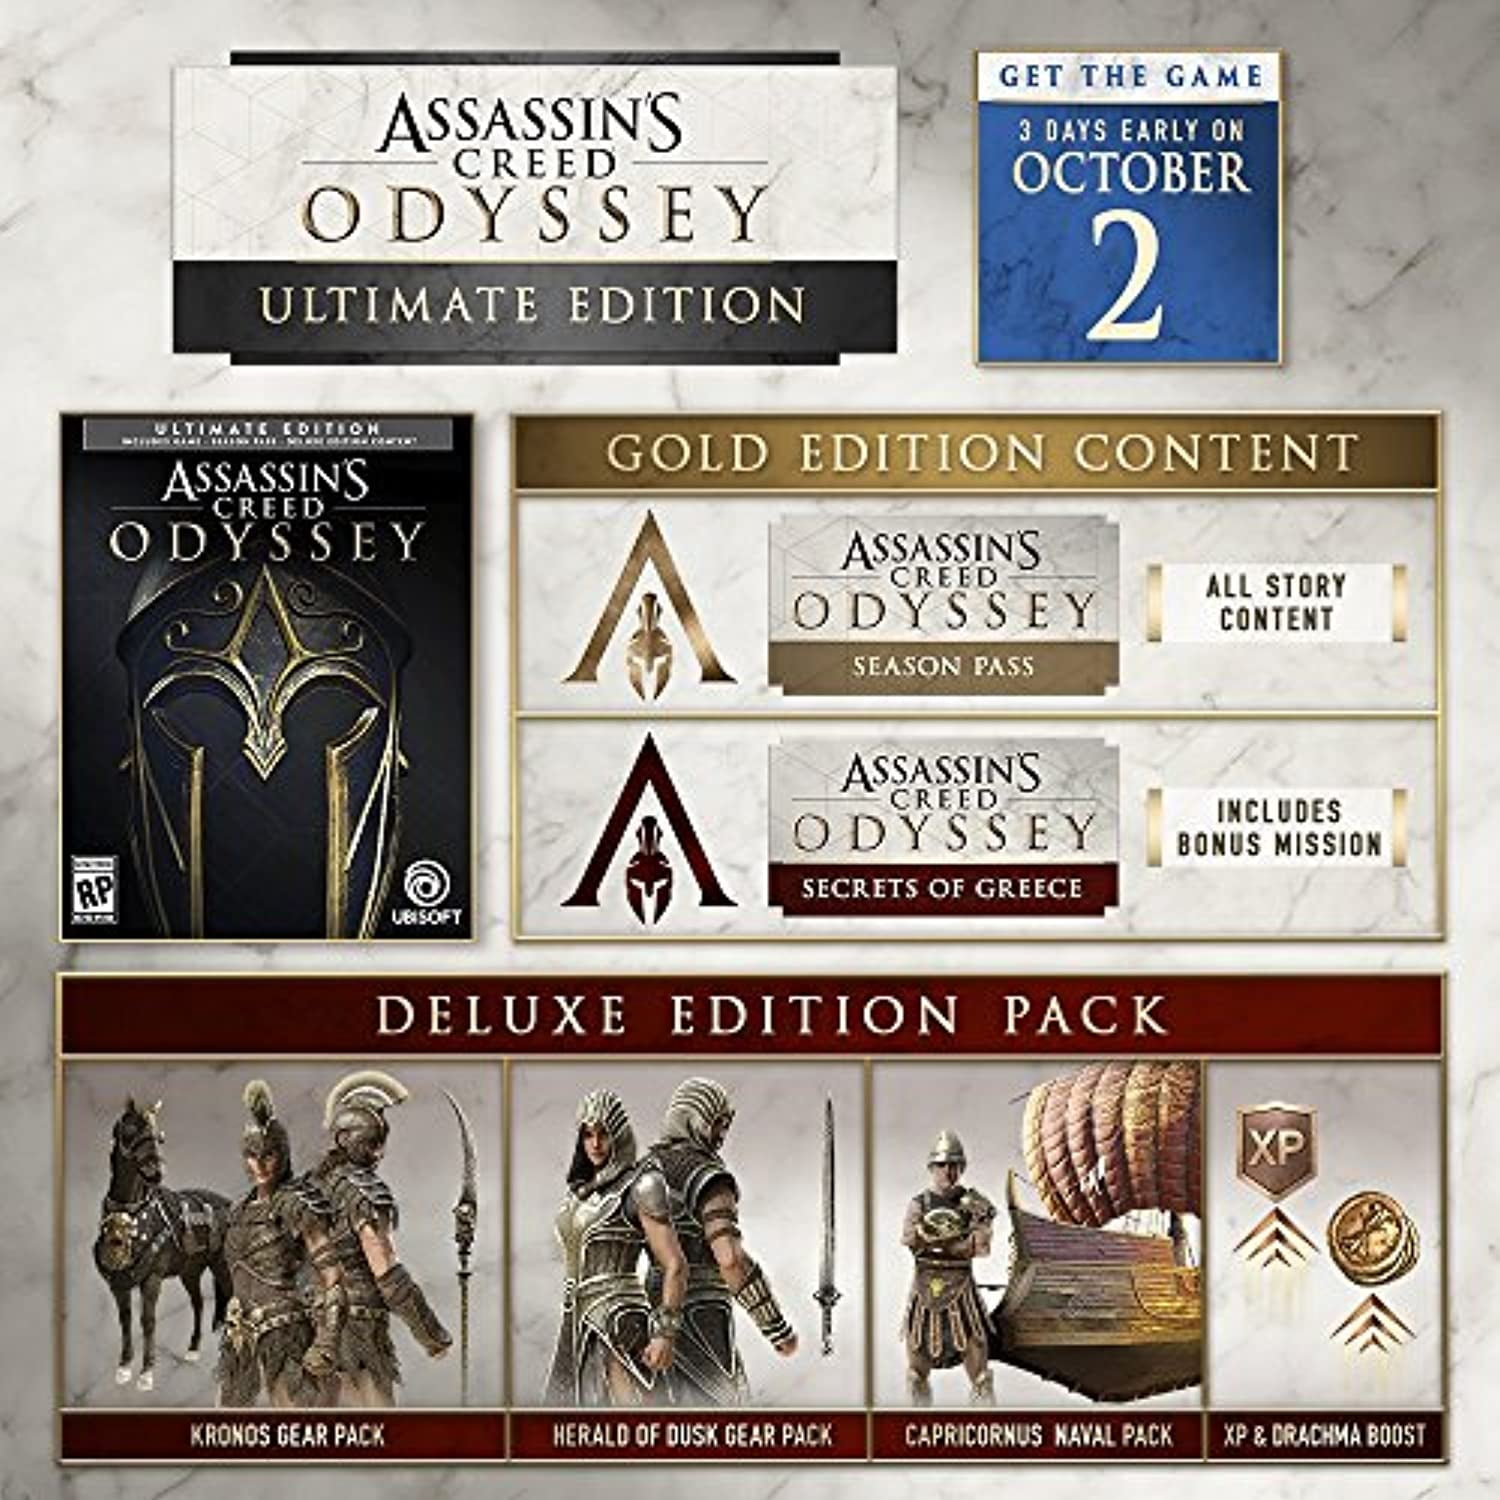 Assassin s creed odyssey editions. Assassin's Creed Odyssey Ultimate Edition ps4. Assassin's Creed Odyssey Gold Edition ps4. Assassin's Creed Odyssey Ultimate Edition Xbox. Ассасин Одиссея Ultimate.